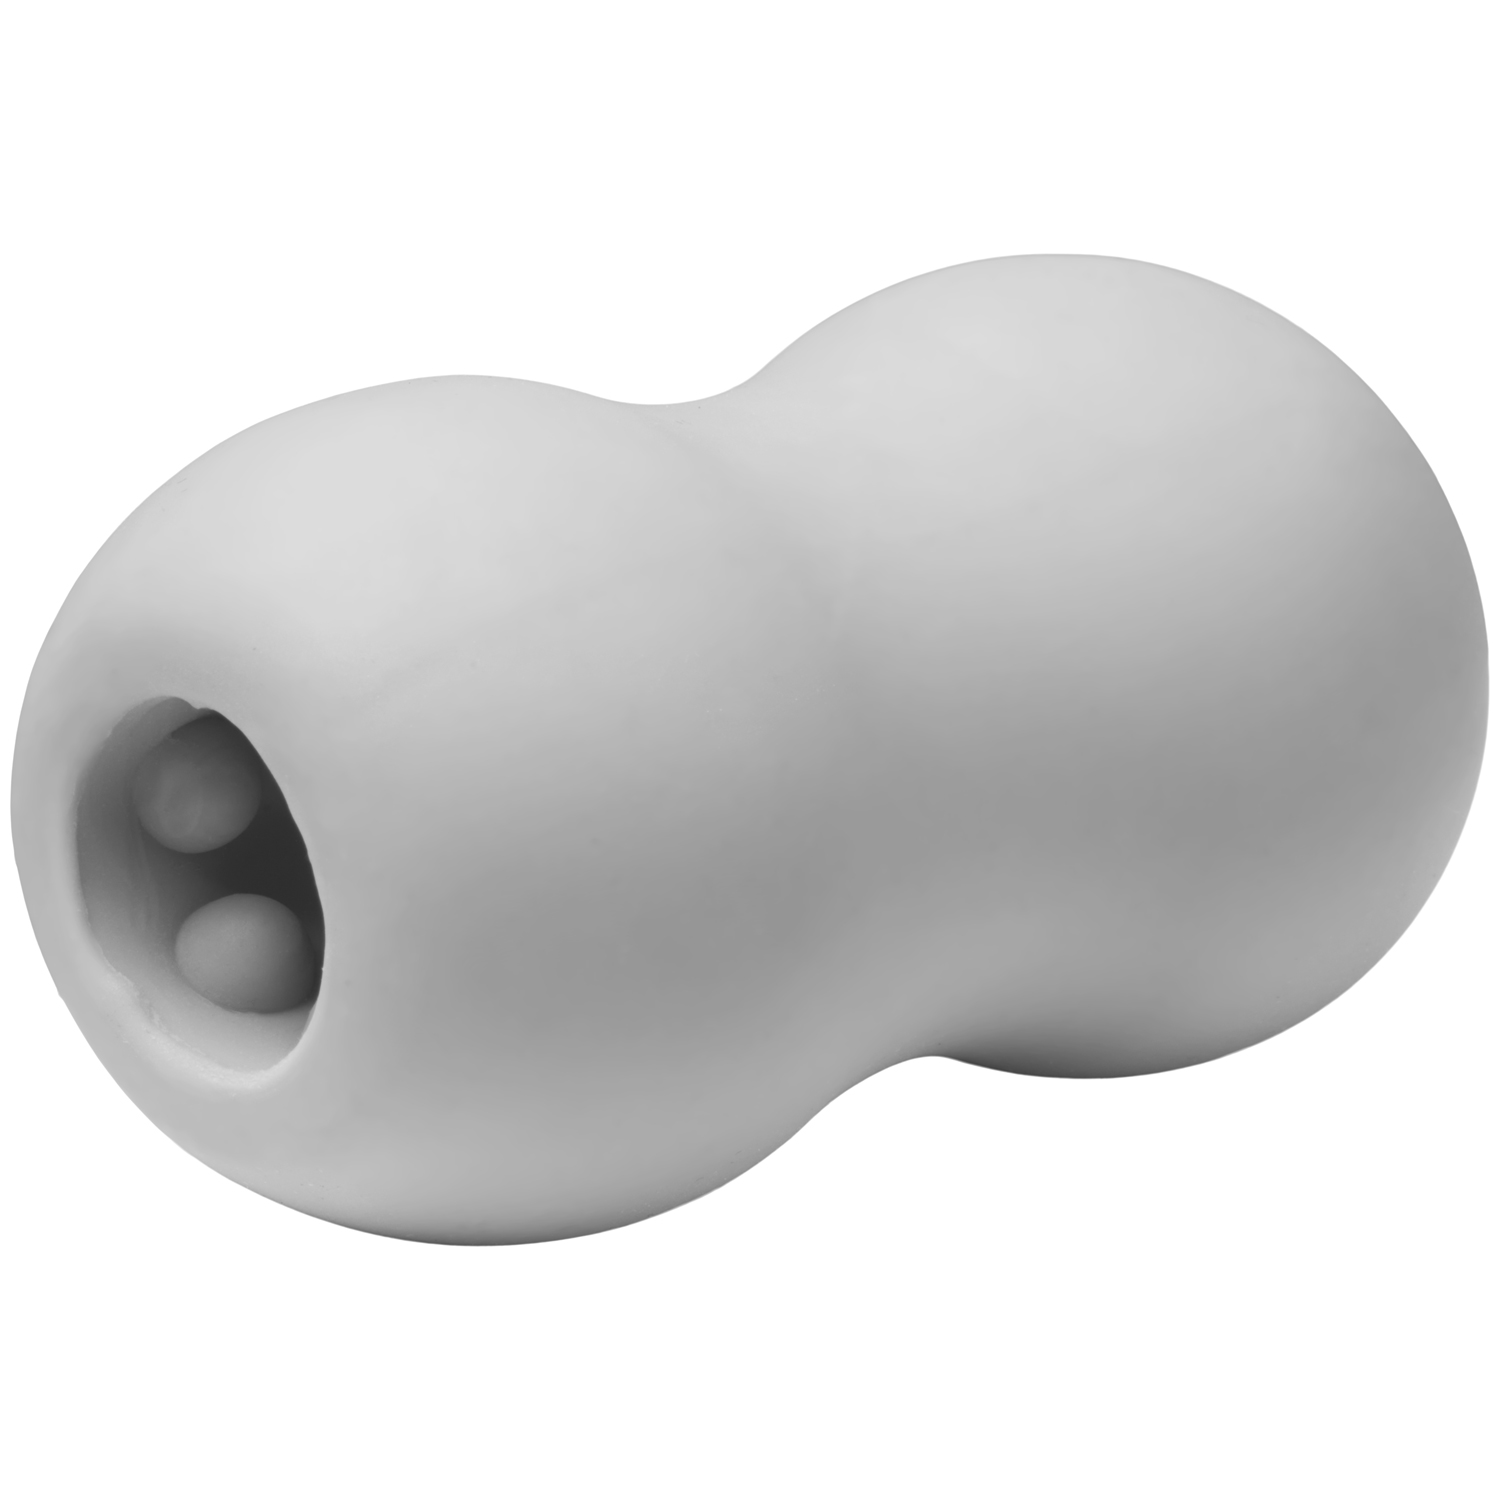 Sinful Quick Launch Stroker - Grey